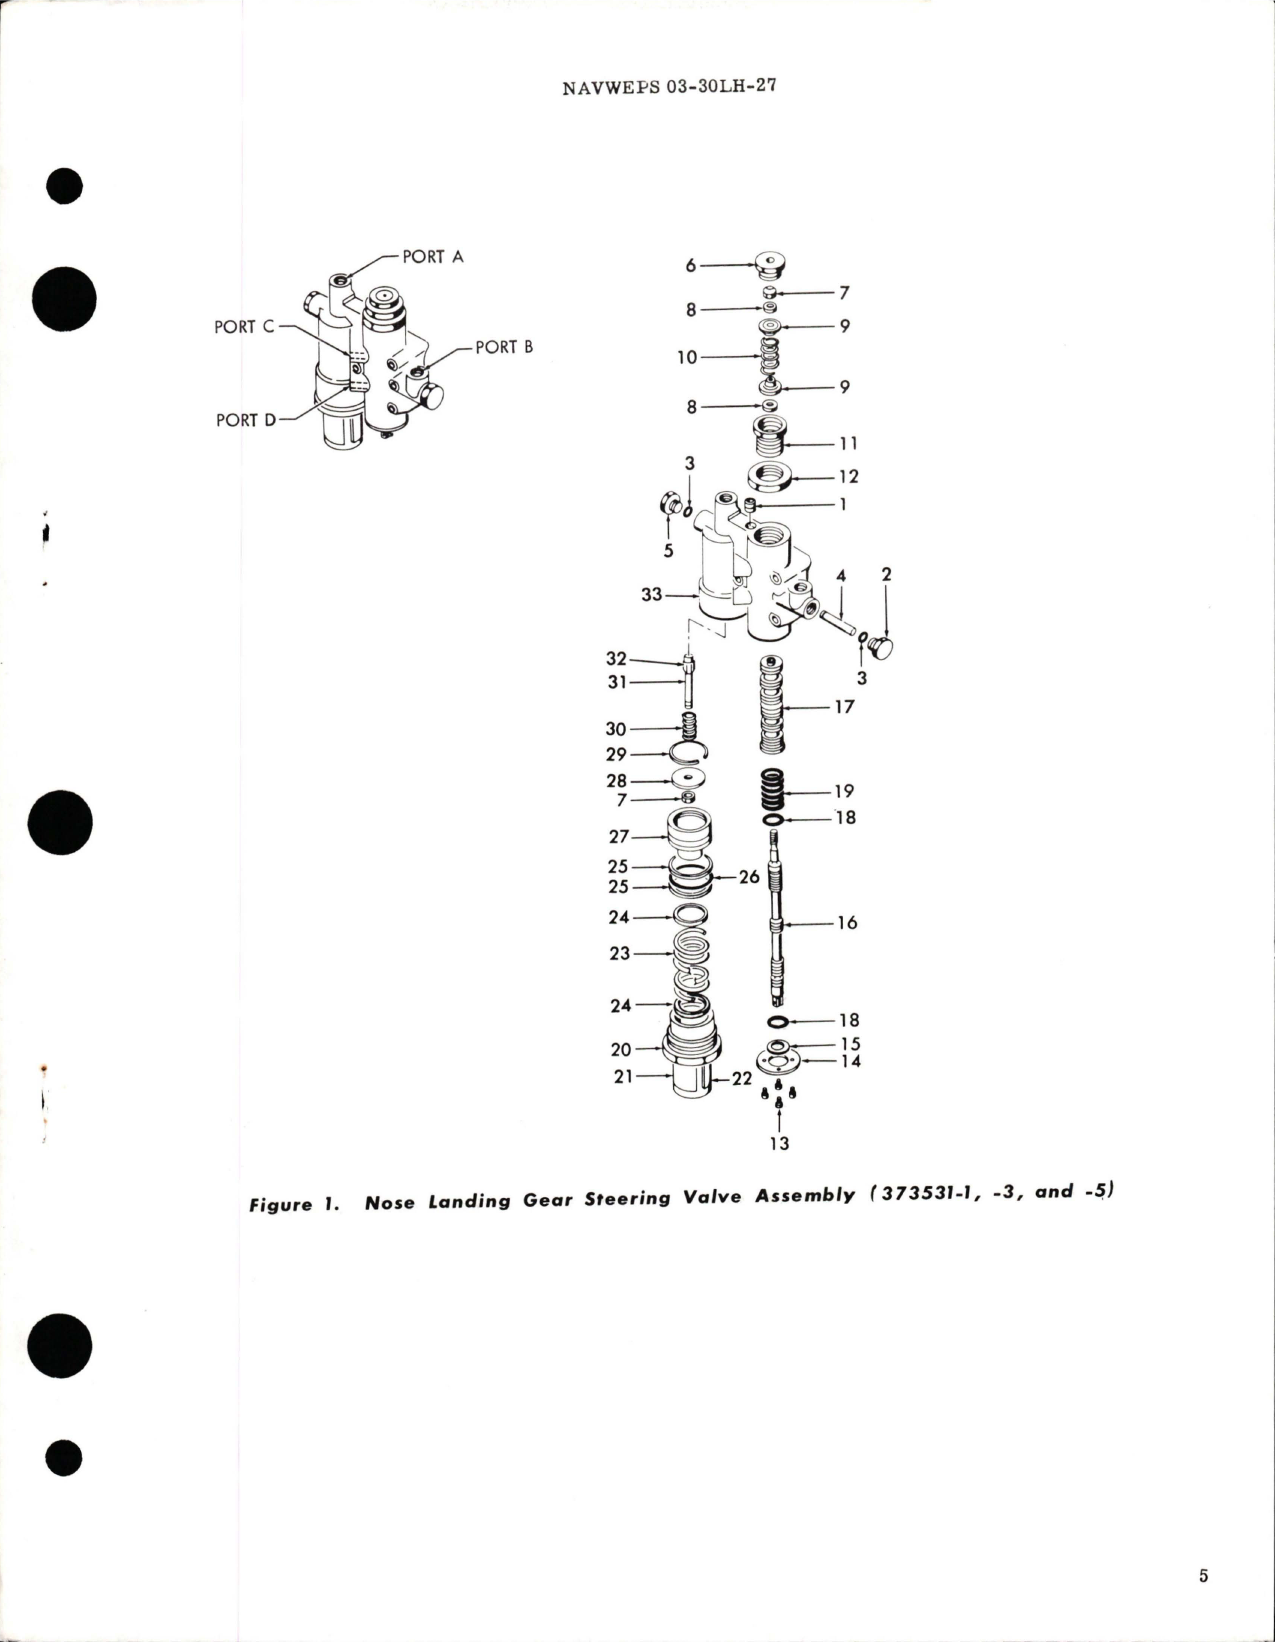 Sample page 5 from AirCorps Library document: Overhaul Instructions with Parts Breakdown for Nose Landing Gear Steering Valve Assembly - Parts 373531-1, 373531-3, and 373531-5